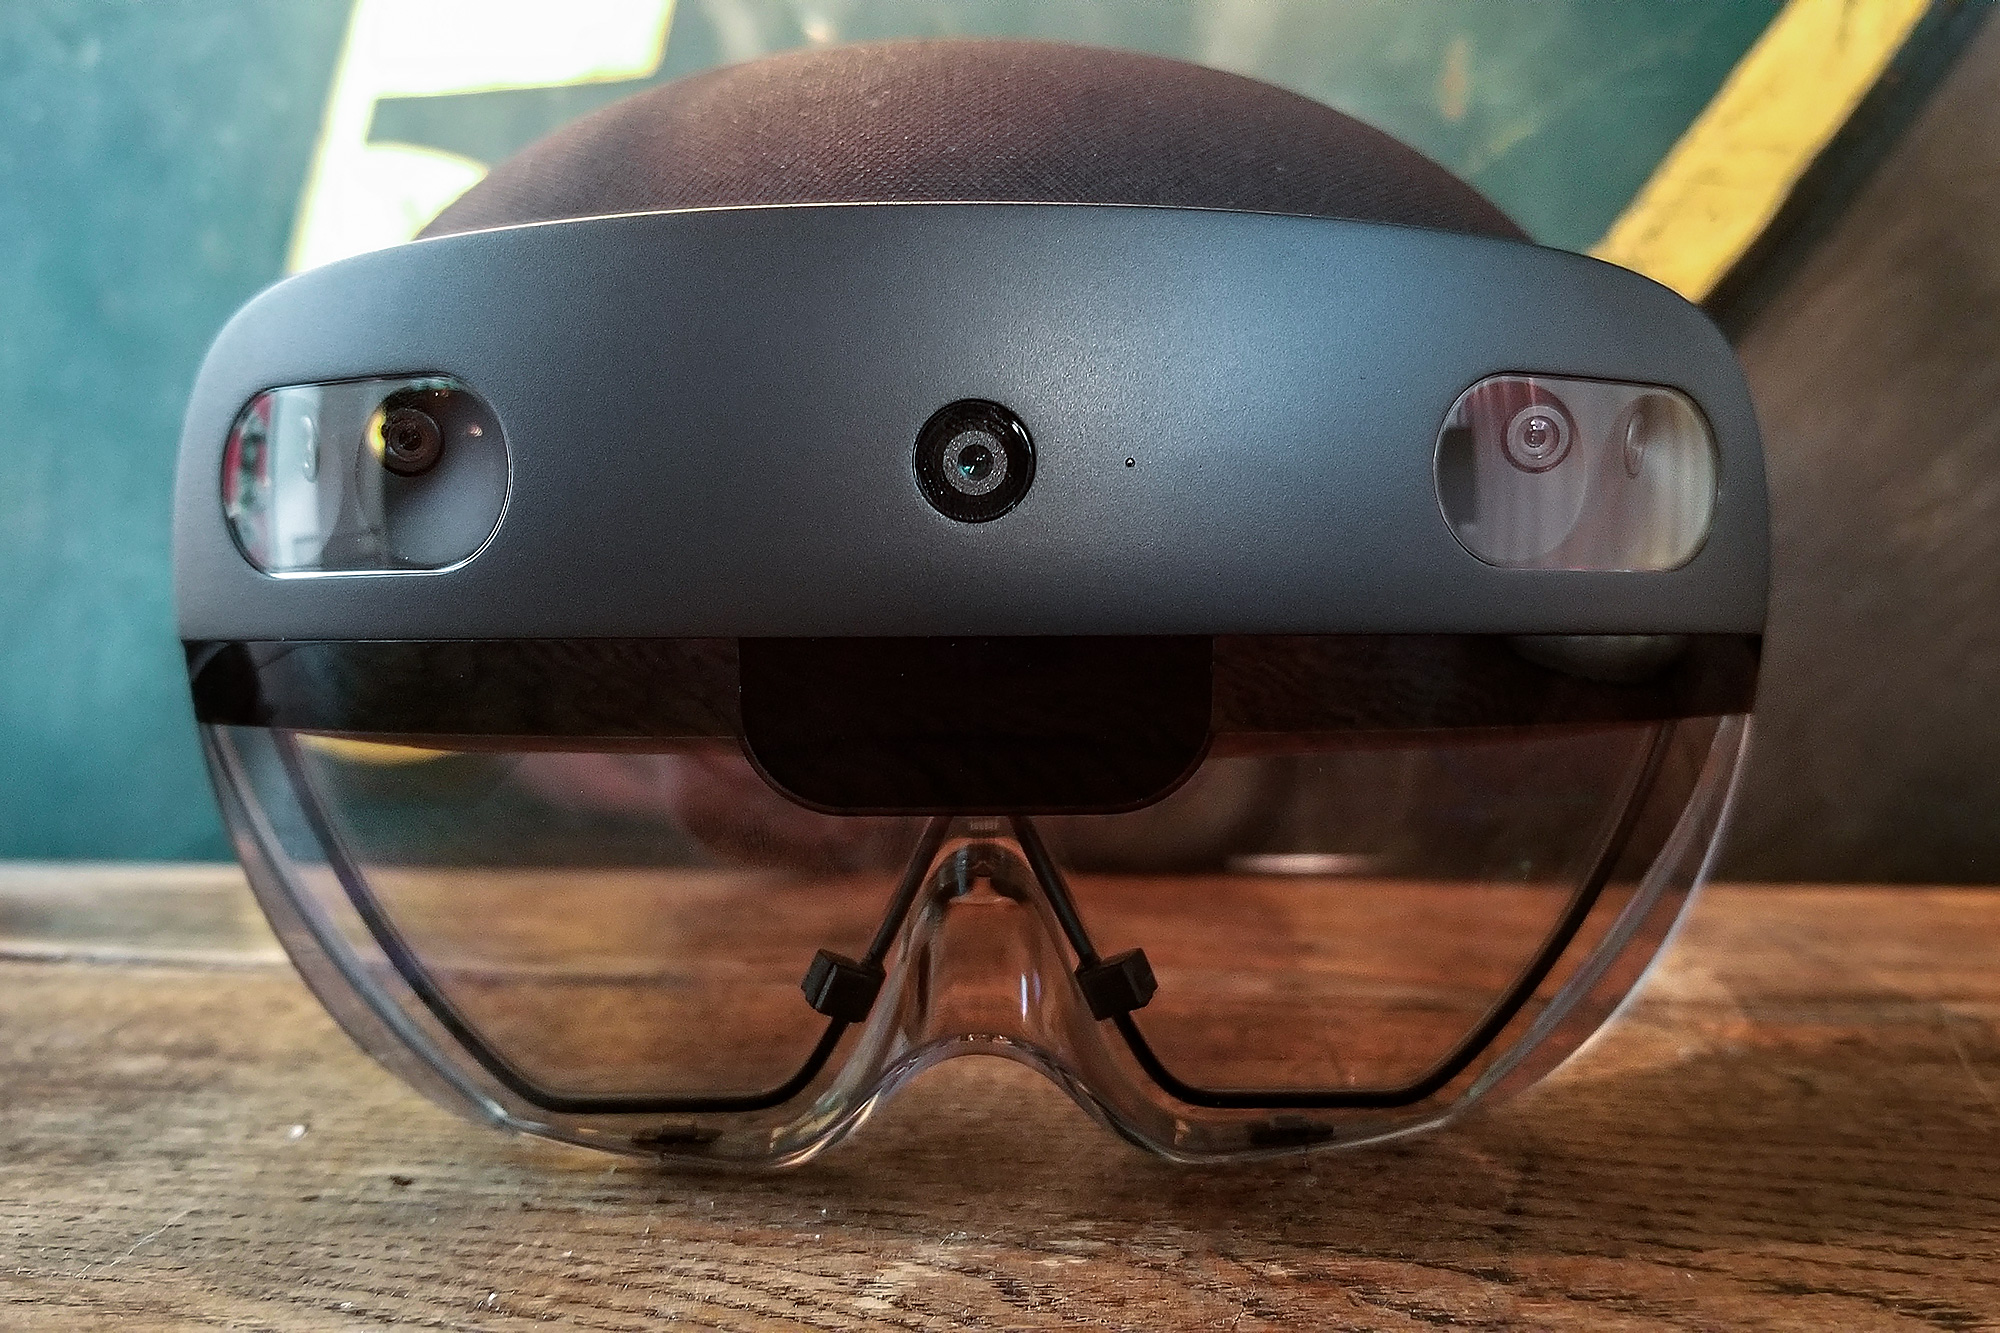 Microsoft HoloLens 2 Hands-On Review: The Future On Your Face